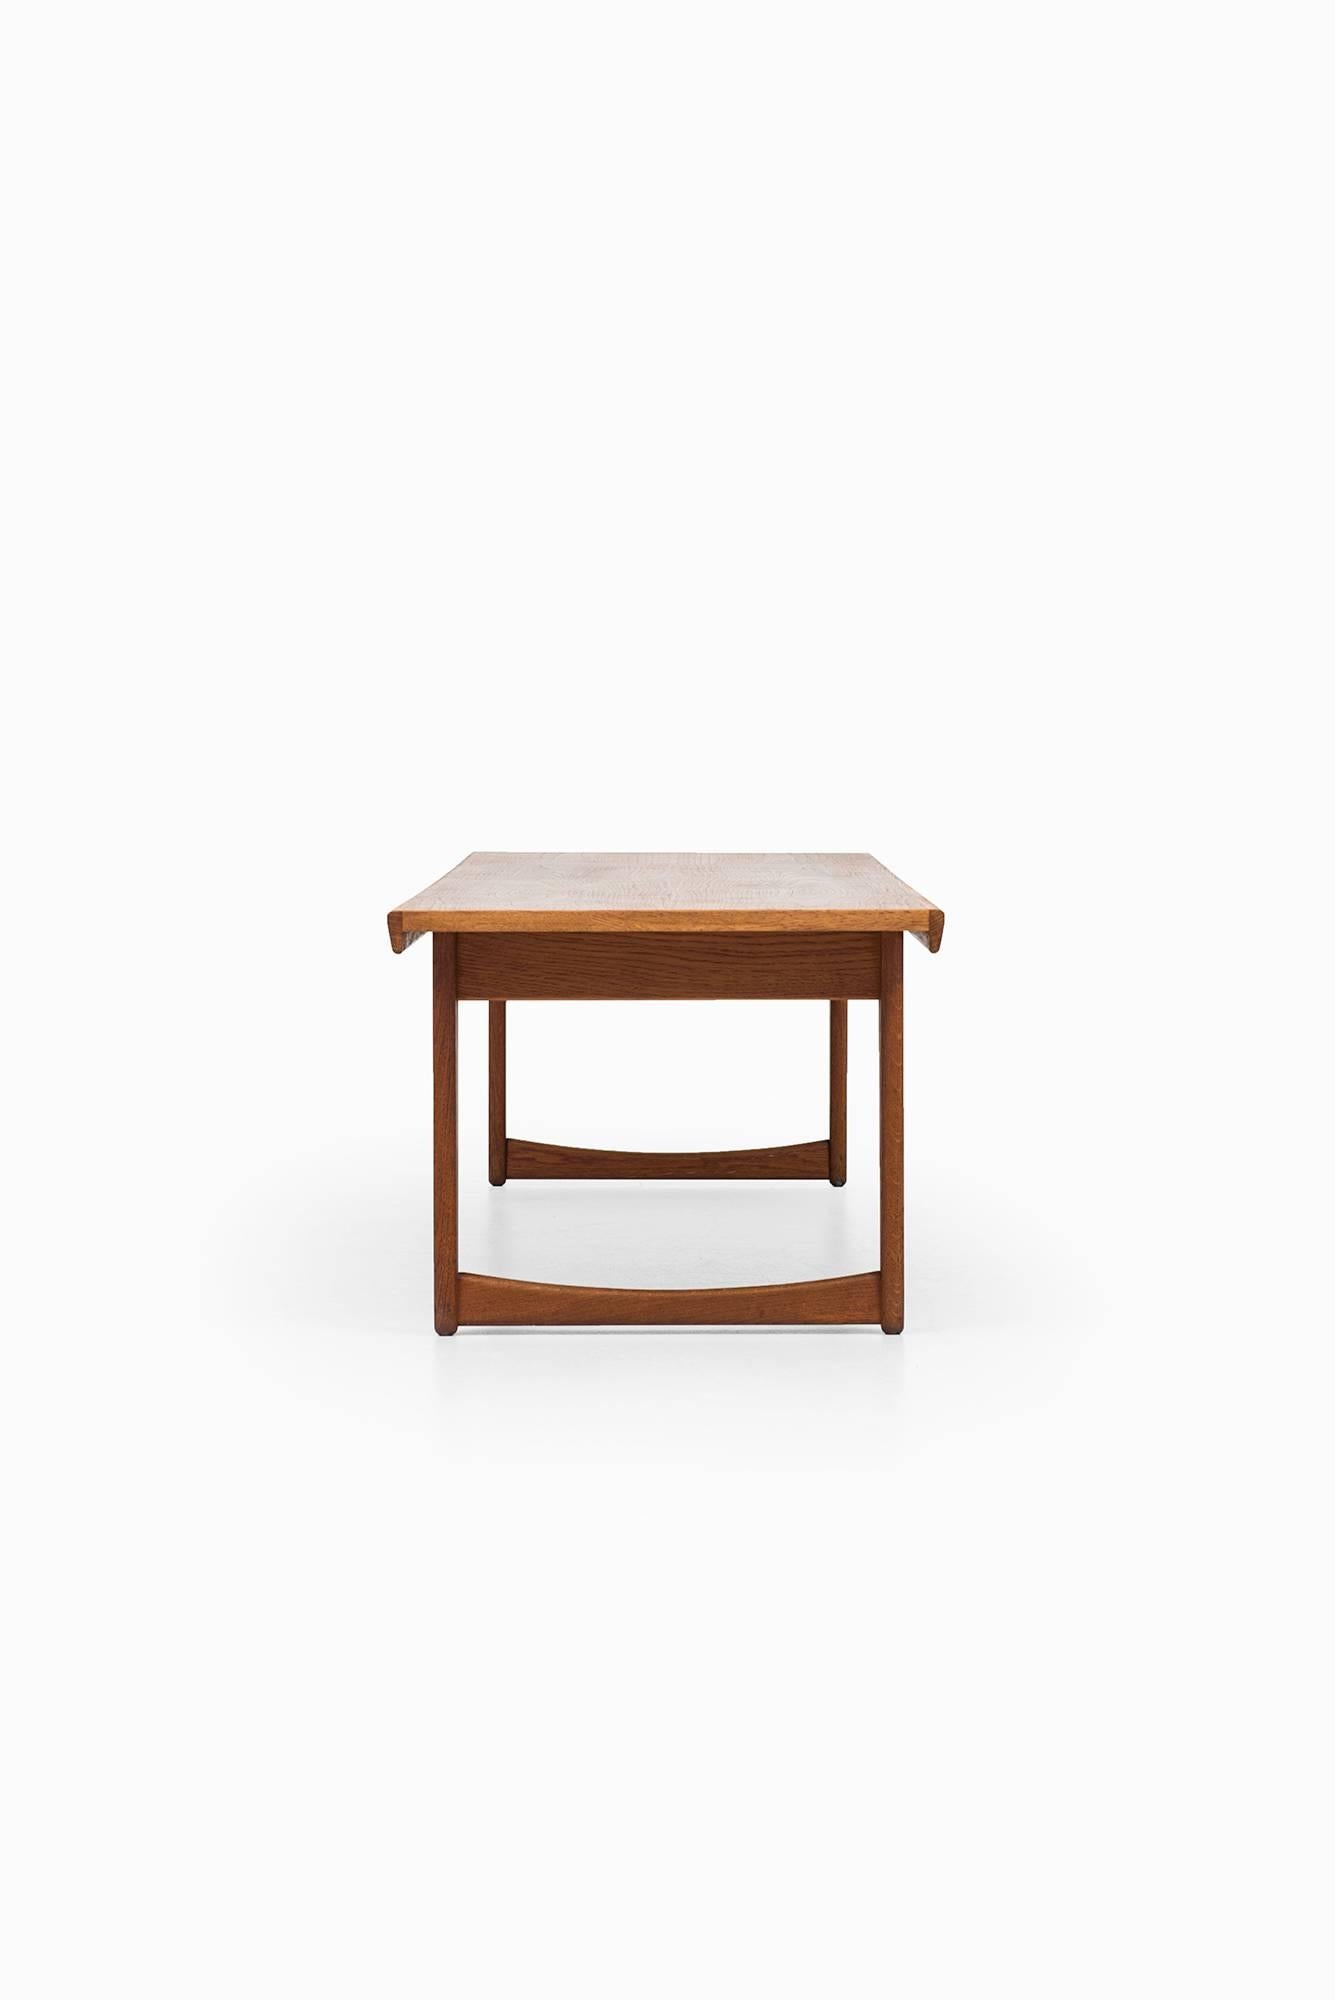 Mid-20th Century Yngve Ekström side table / bench produced by Westbergs in Sweden